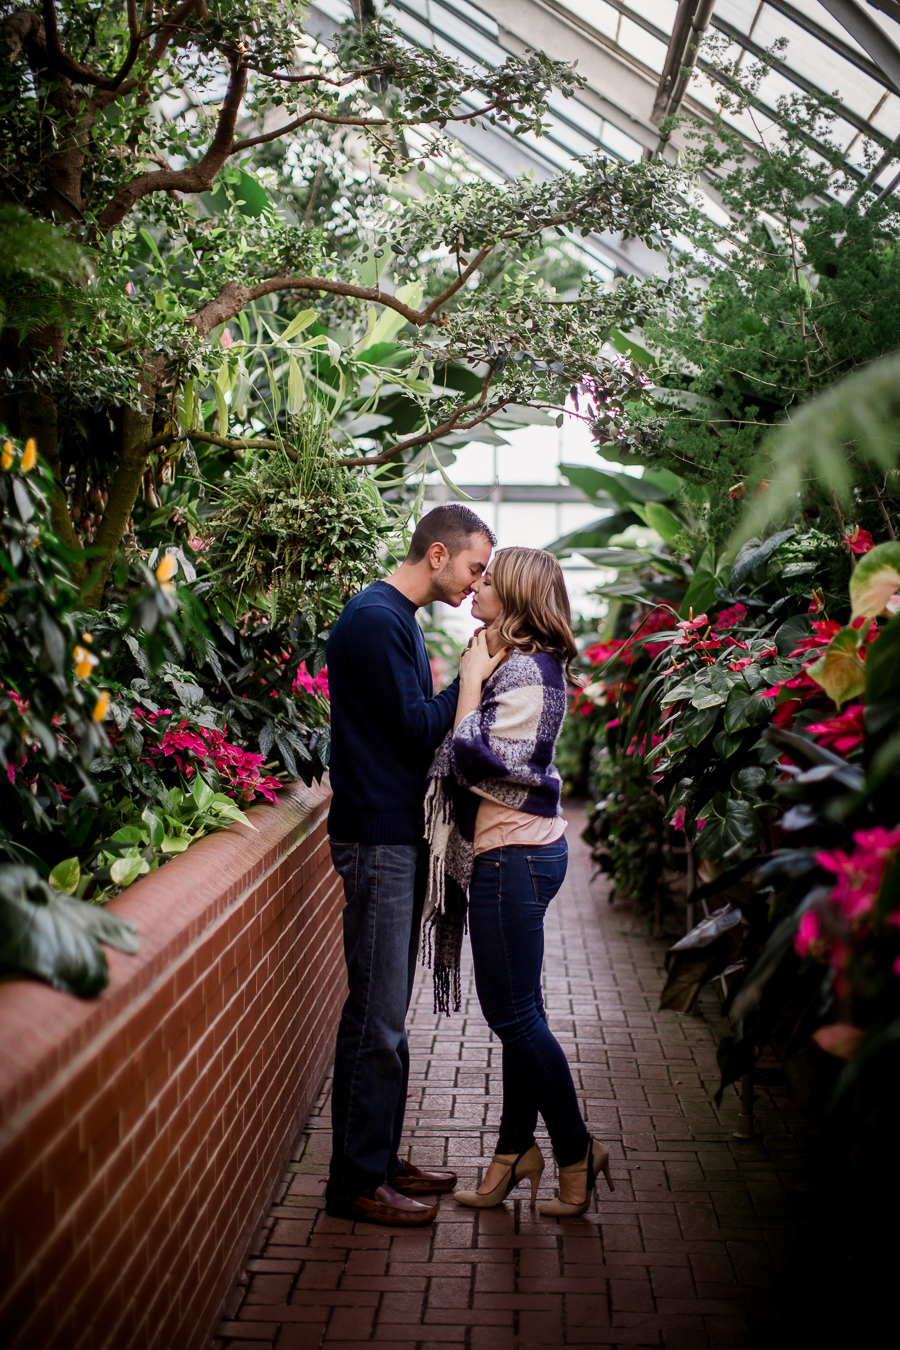 Standing in the aisle of a greenhouse engagement photo by Knoxville Wedding Photographer, Amanda May Photos.